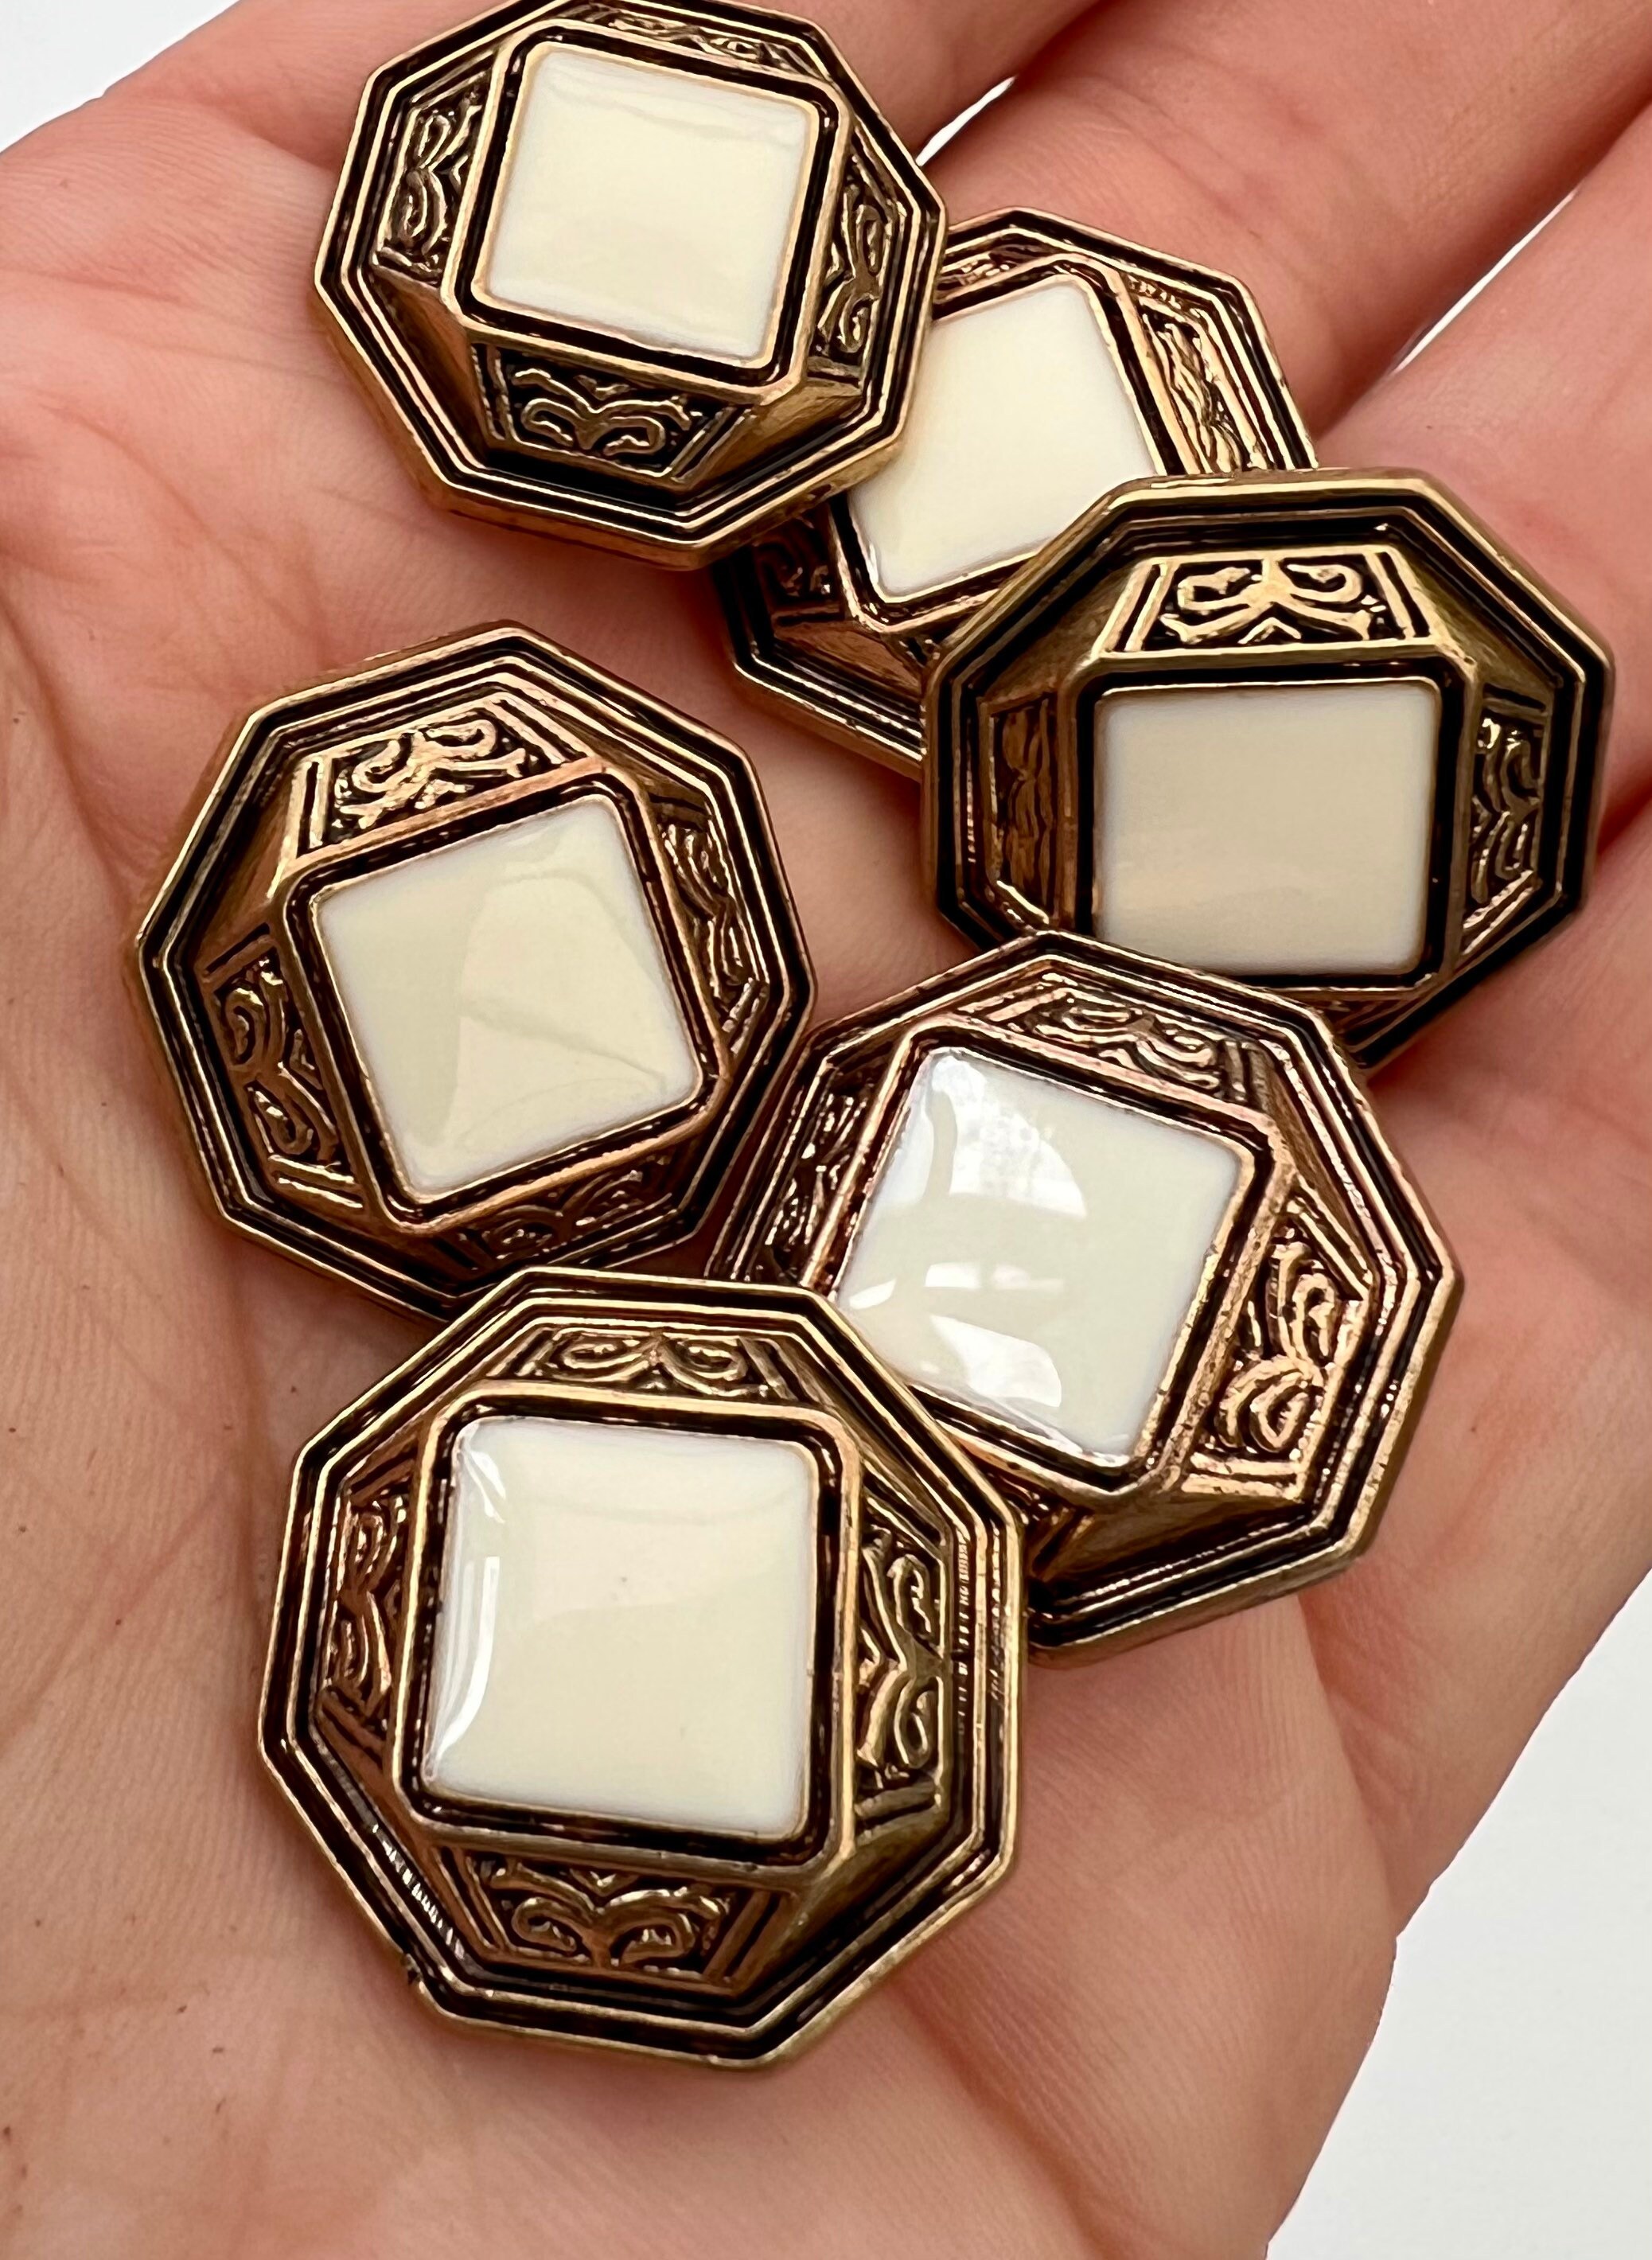 4 Vintage Mother of Pearl Buttons Large Size, 4 Big Mother of